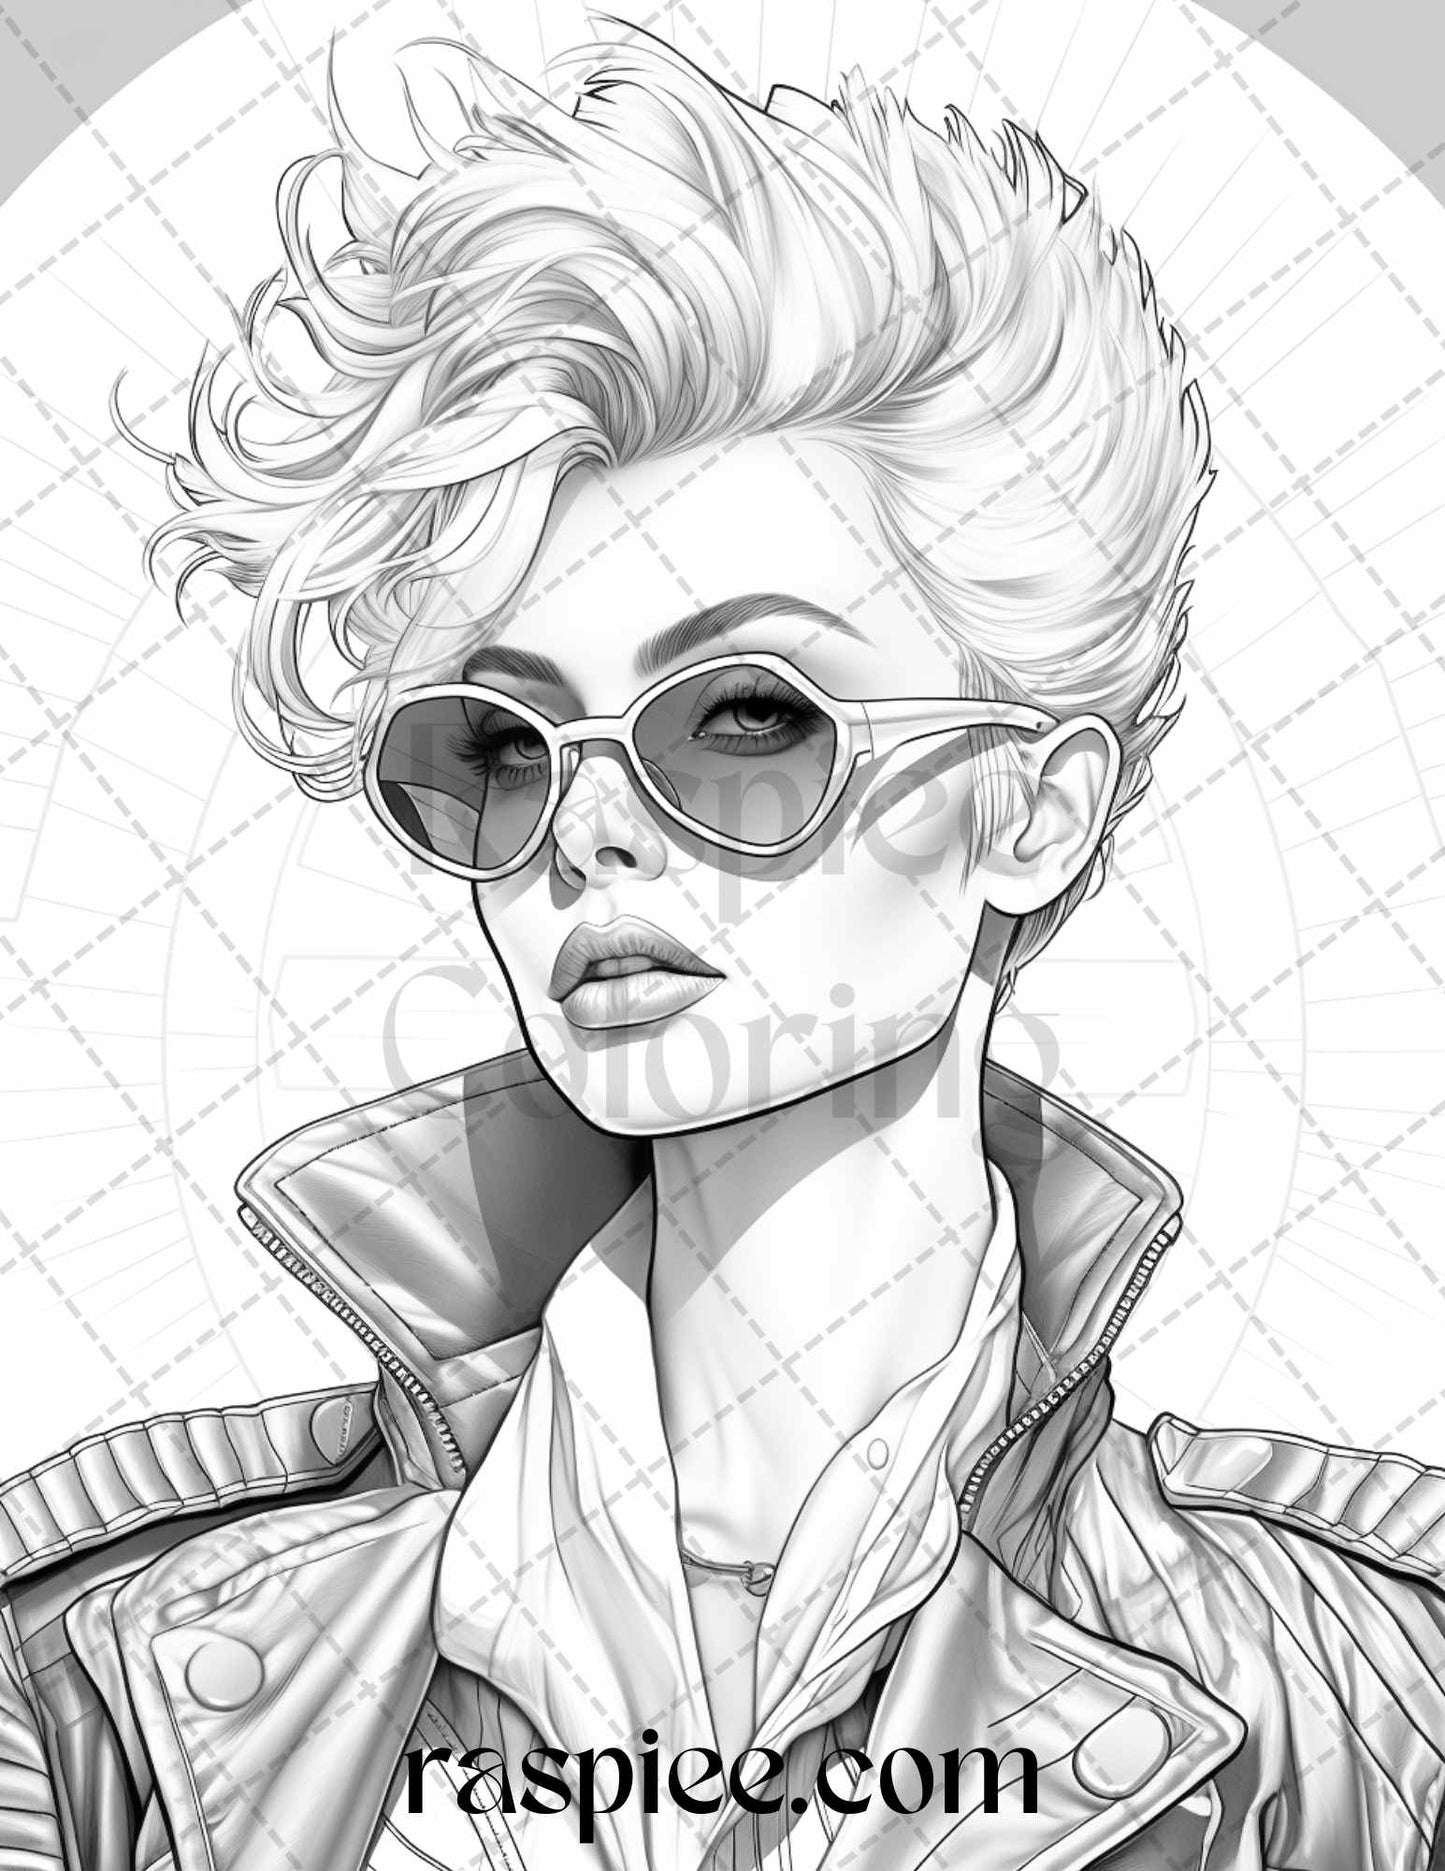 1980s New Wave Pop Star Grayscale Coloring Pages Printable for Adults, PDF File Instant Download